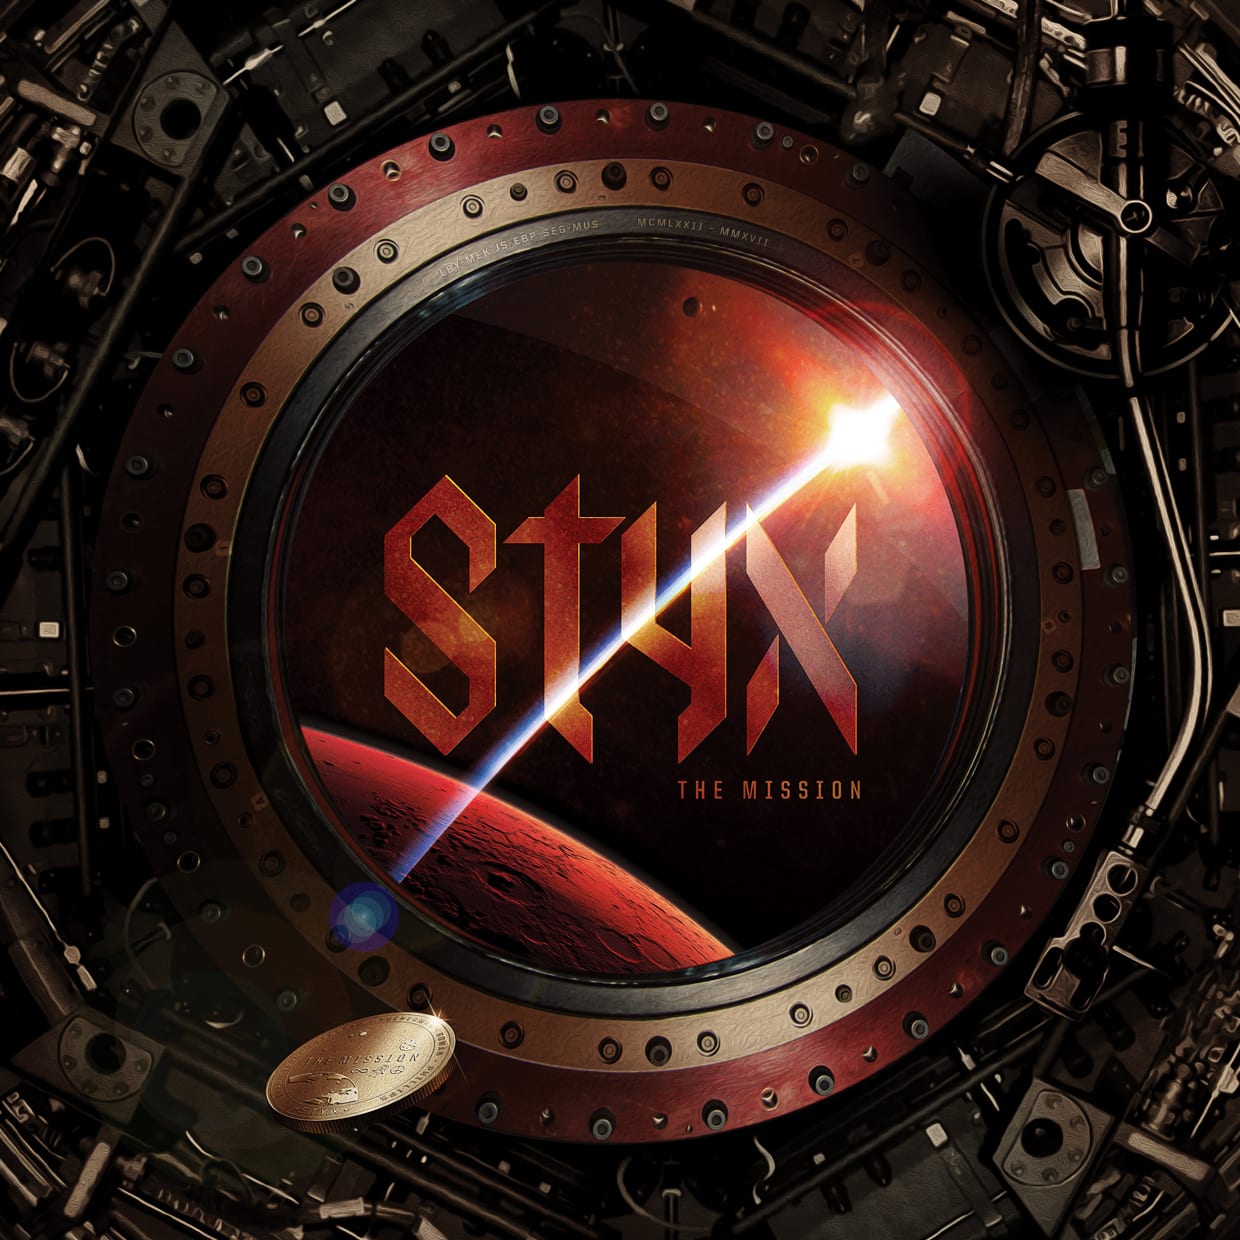 STYX – The Mission